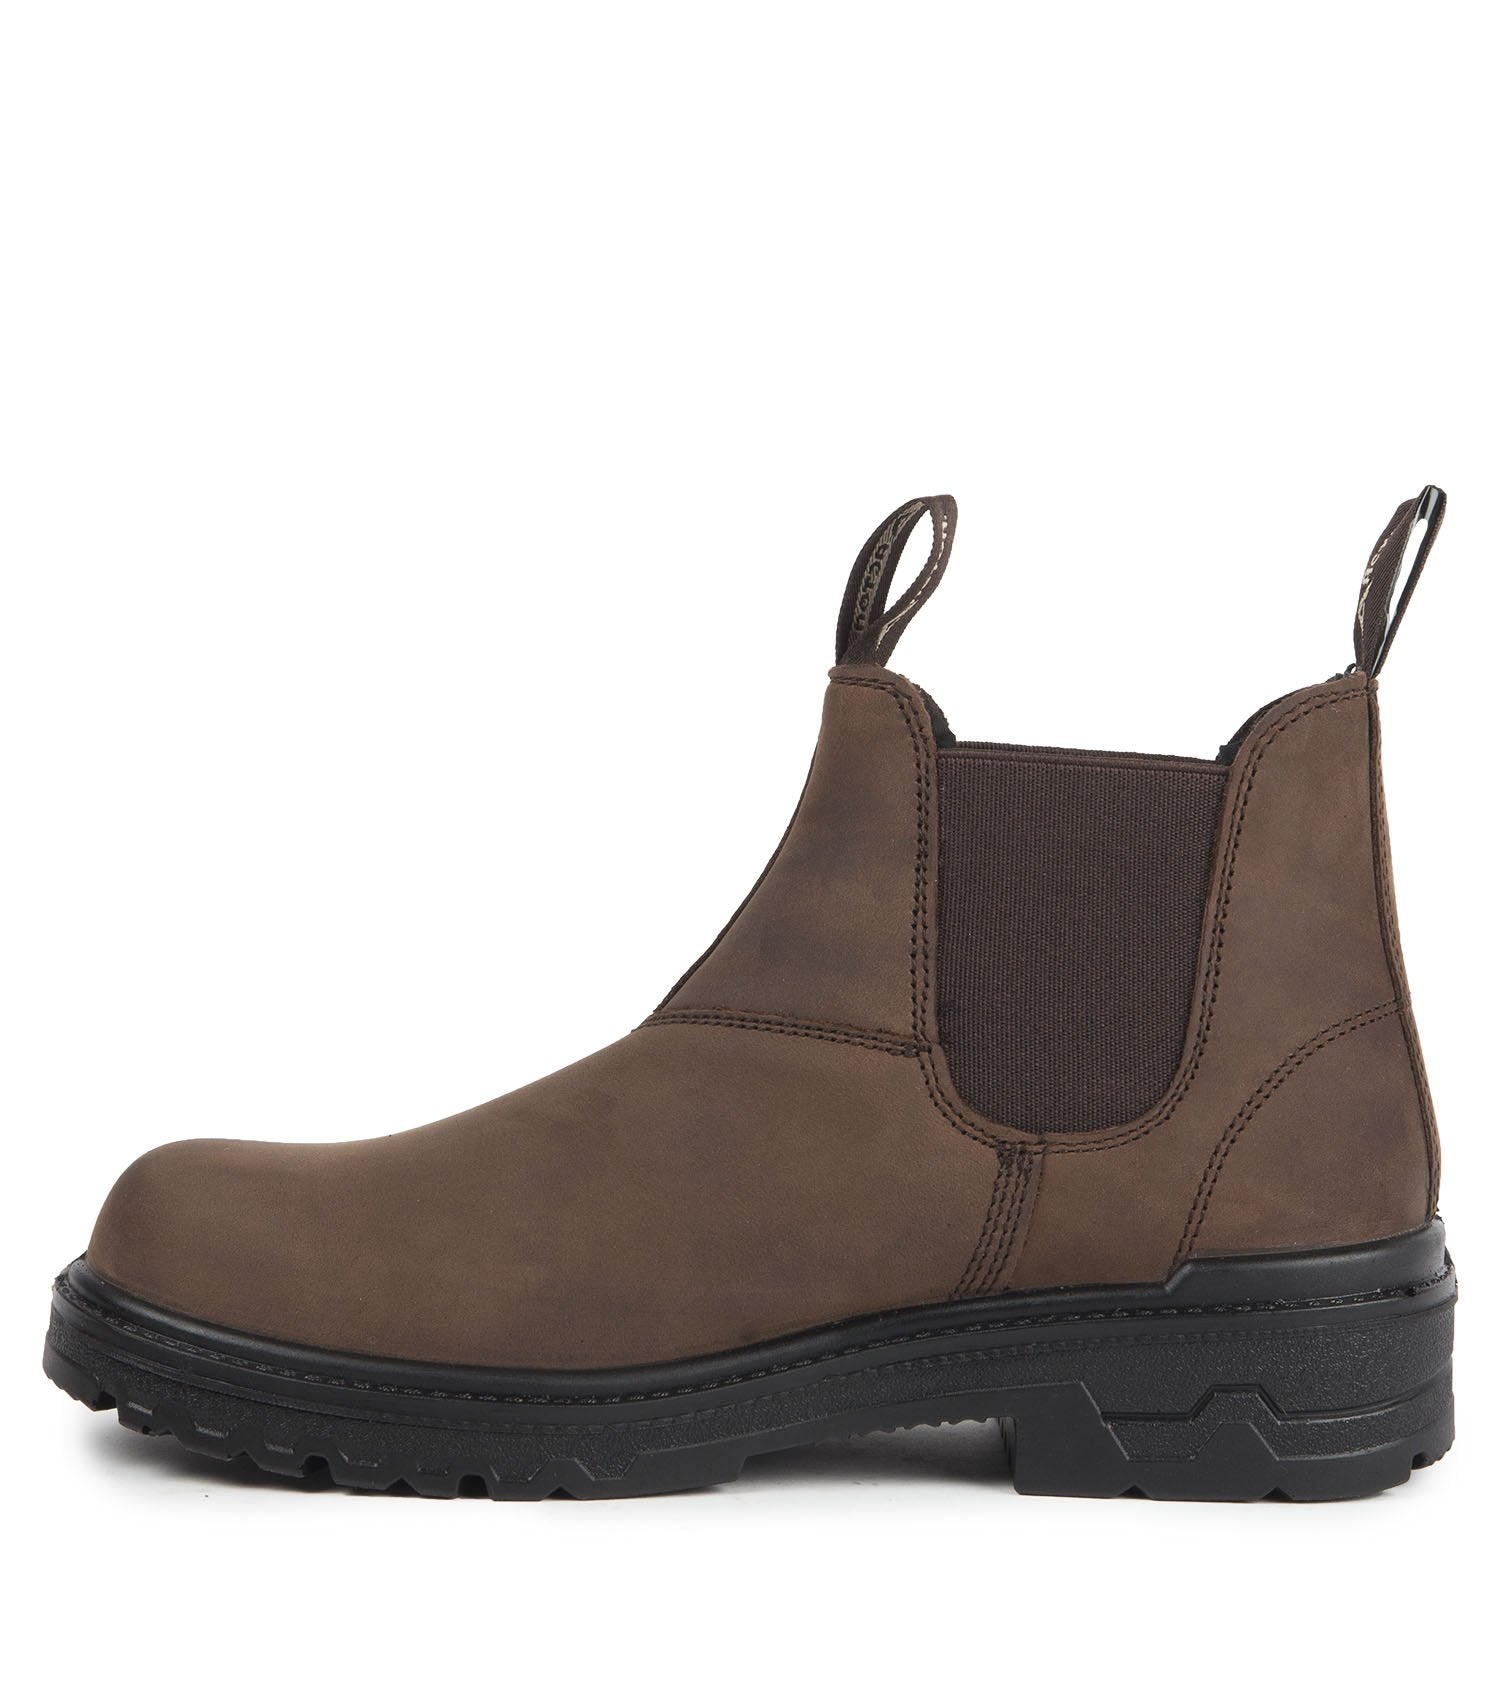 Acton Profile 6" Steel Toe Brown Leather Chelsea Safety Work Boots | Brown | Sizes 4 - 14 Work Boots - Cleanflow